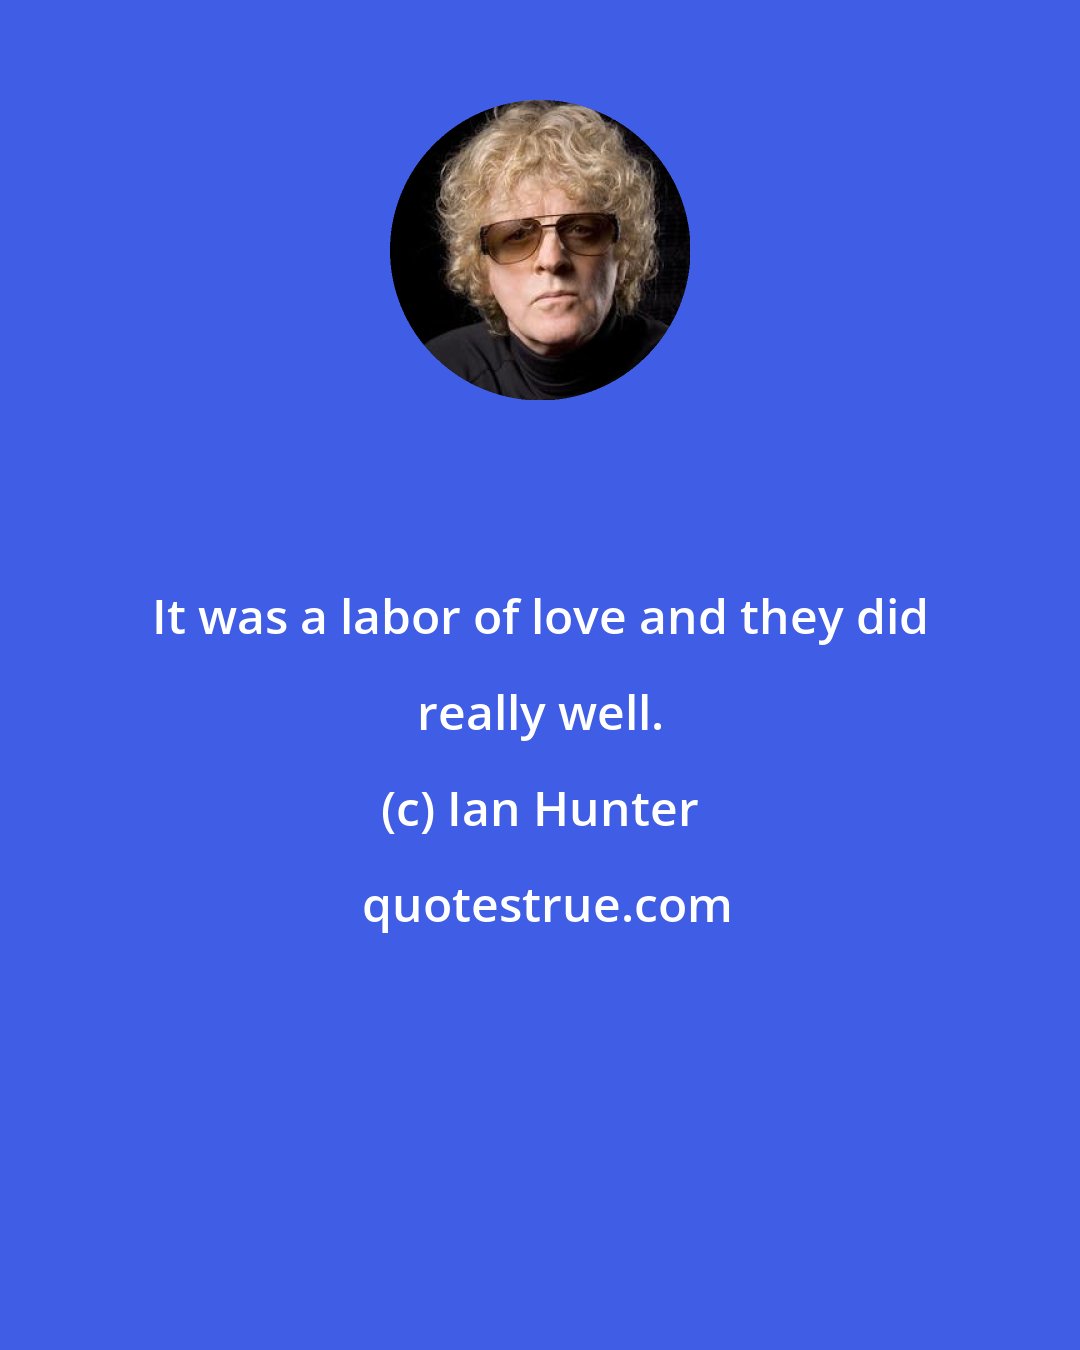 Ian Hunter: It was a labor of love and they did really well.